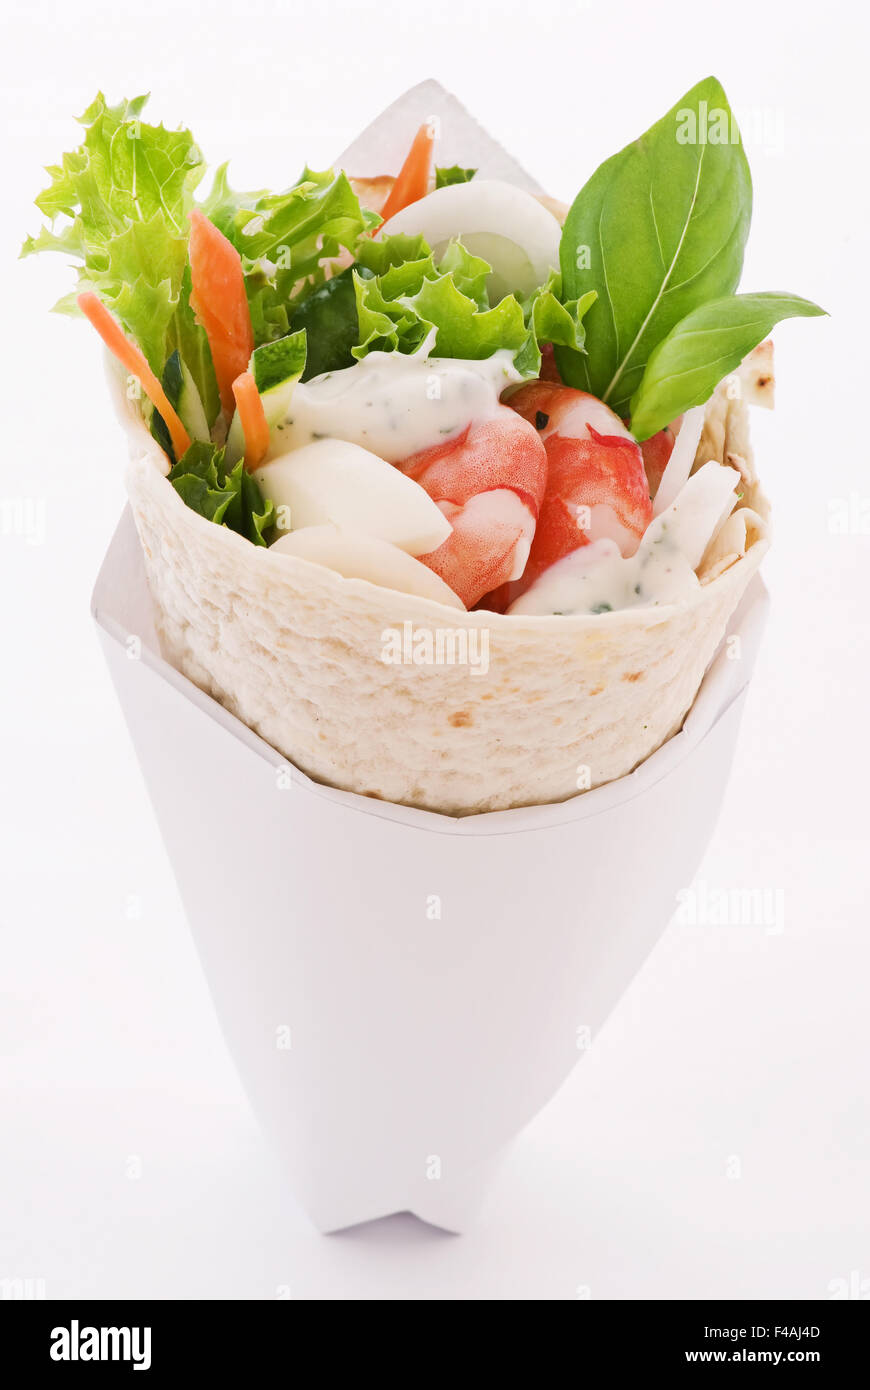 Bread and Wheat, Human food,Pineapple Juice, World Food,Tomato, Green Food, Roats, Coconut , Meat,Doner Stock Photo